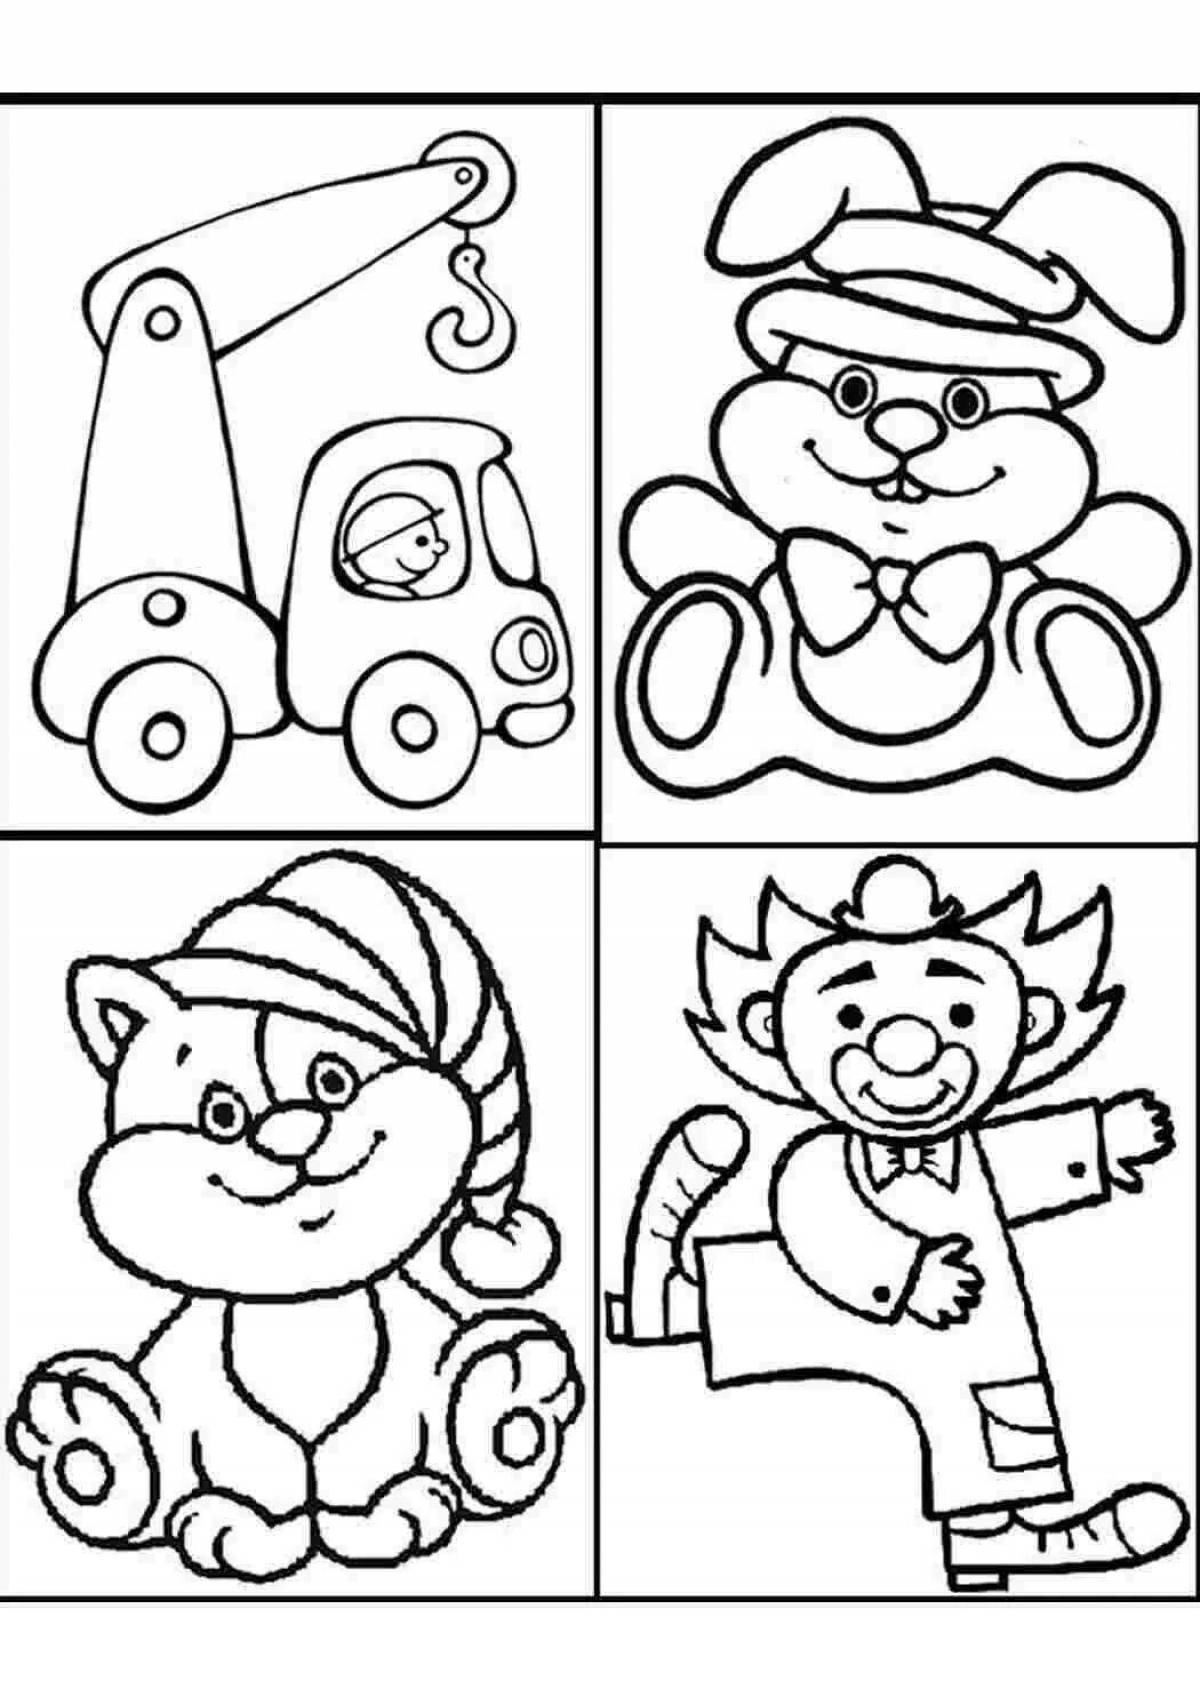 Intense coloring pages